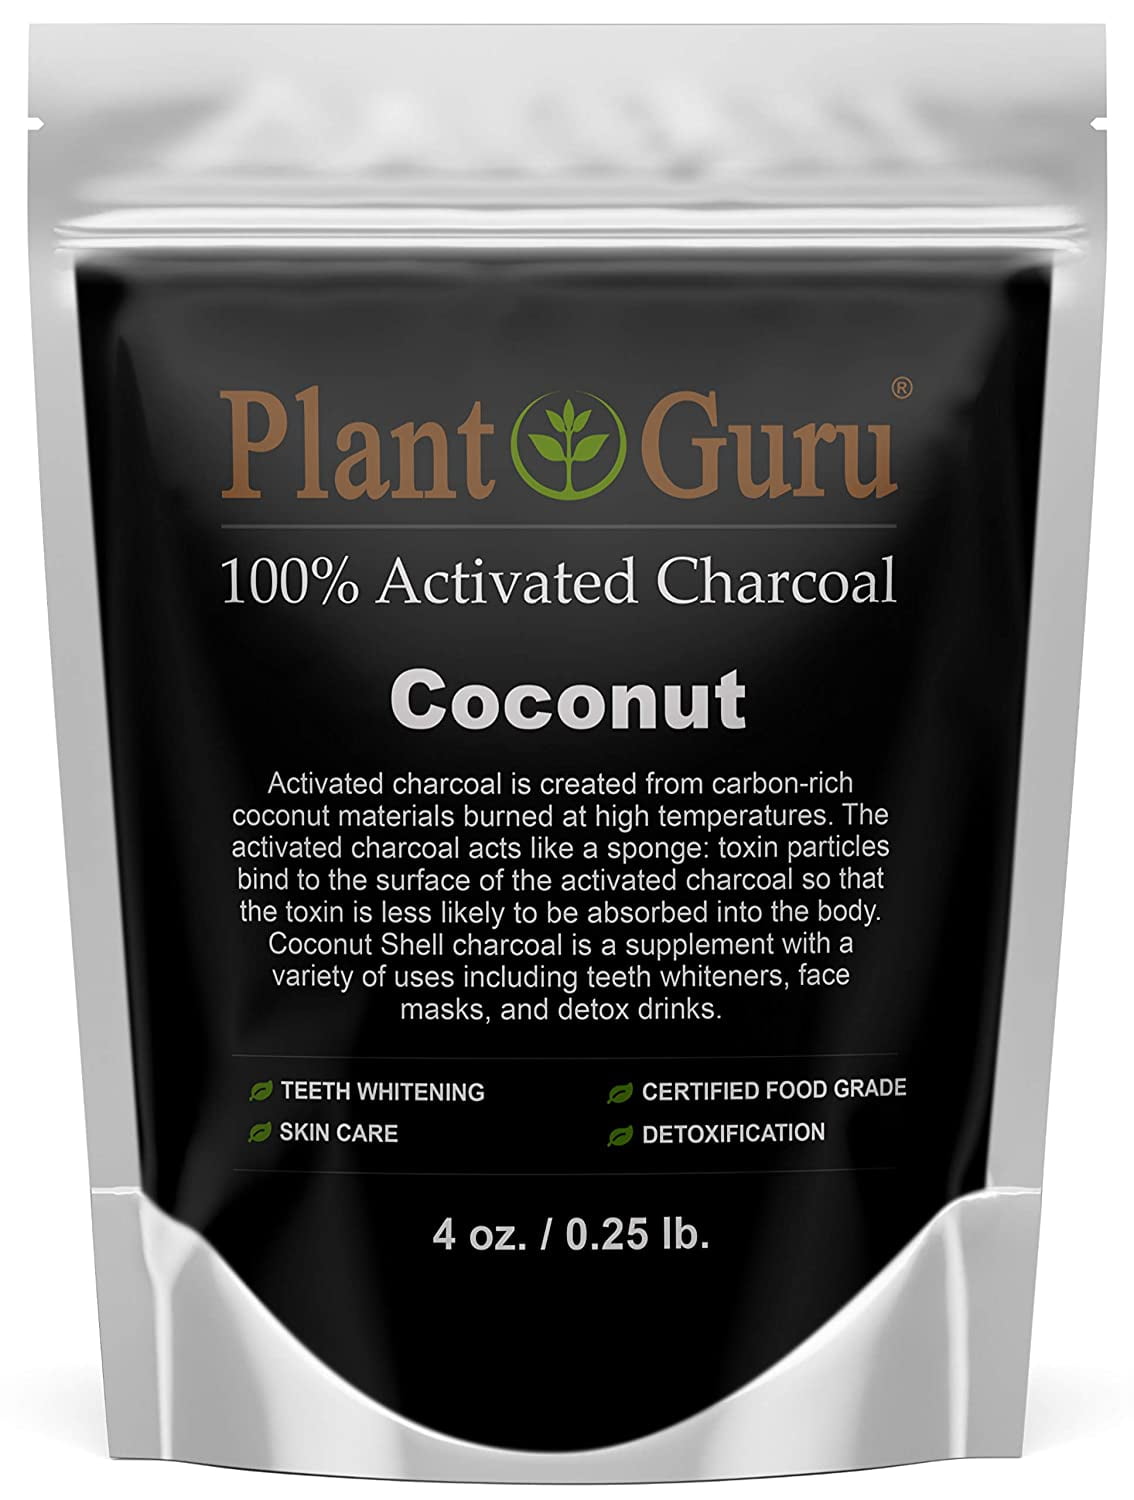 Charcoal Powder, Activated  Country Life Natural Foods